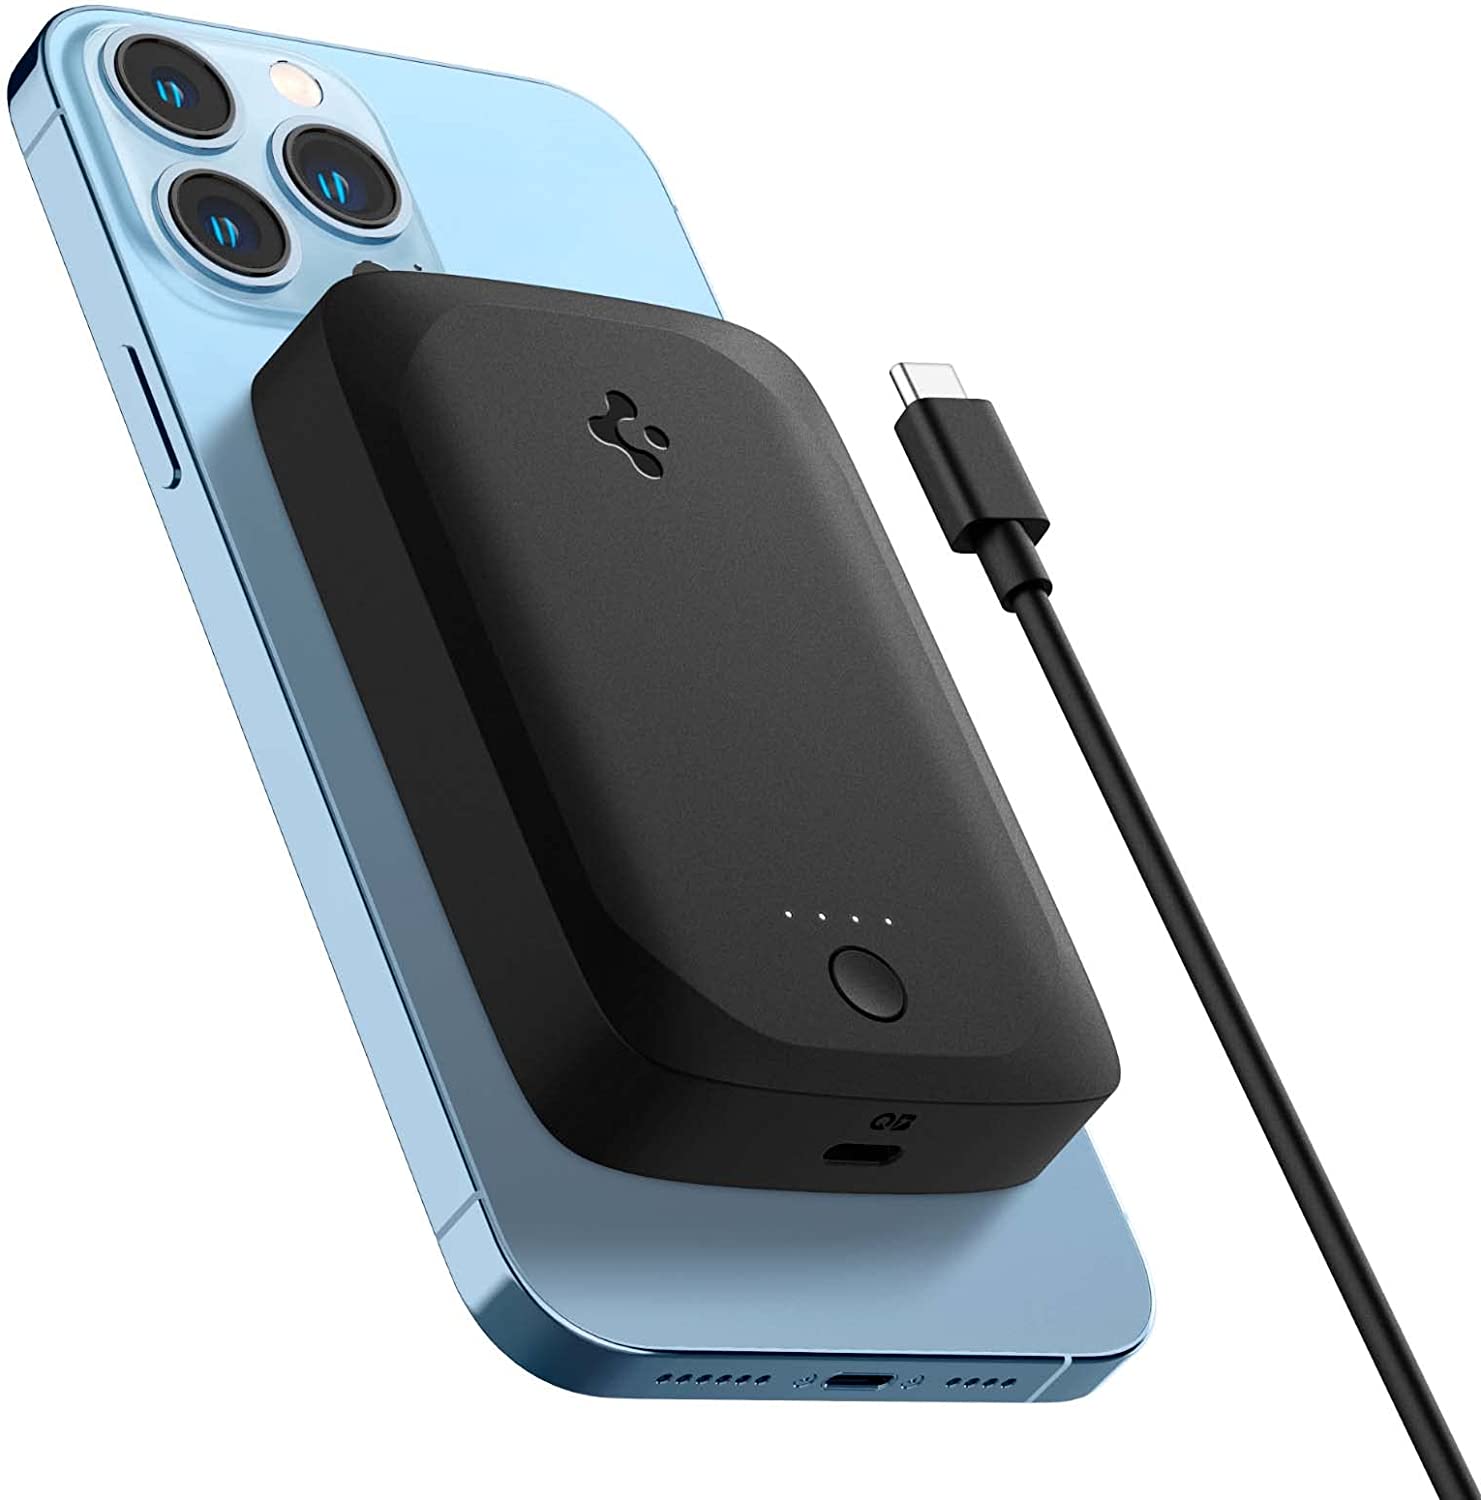 Spigen’s ArcHybrid magnetic battery pack for iPhone is back down to $34